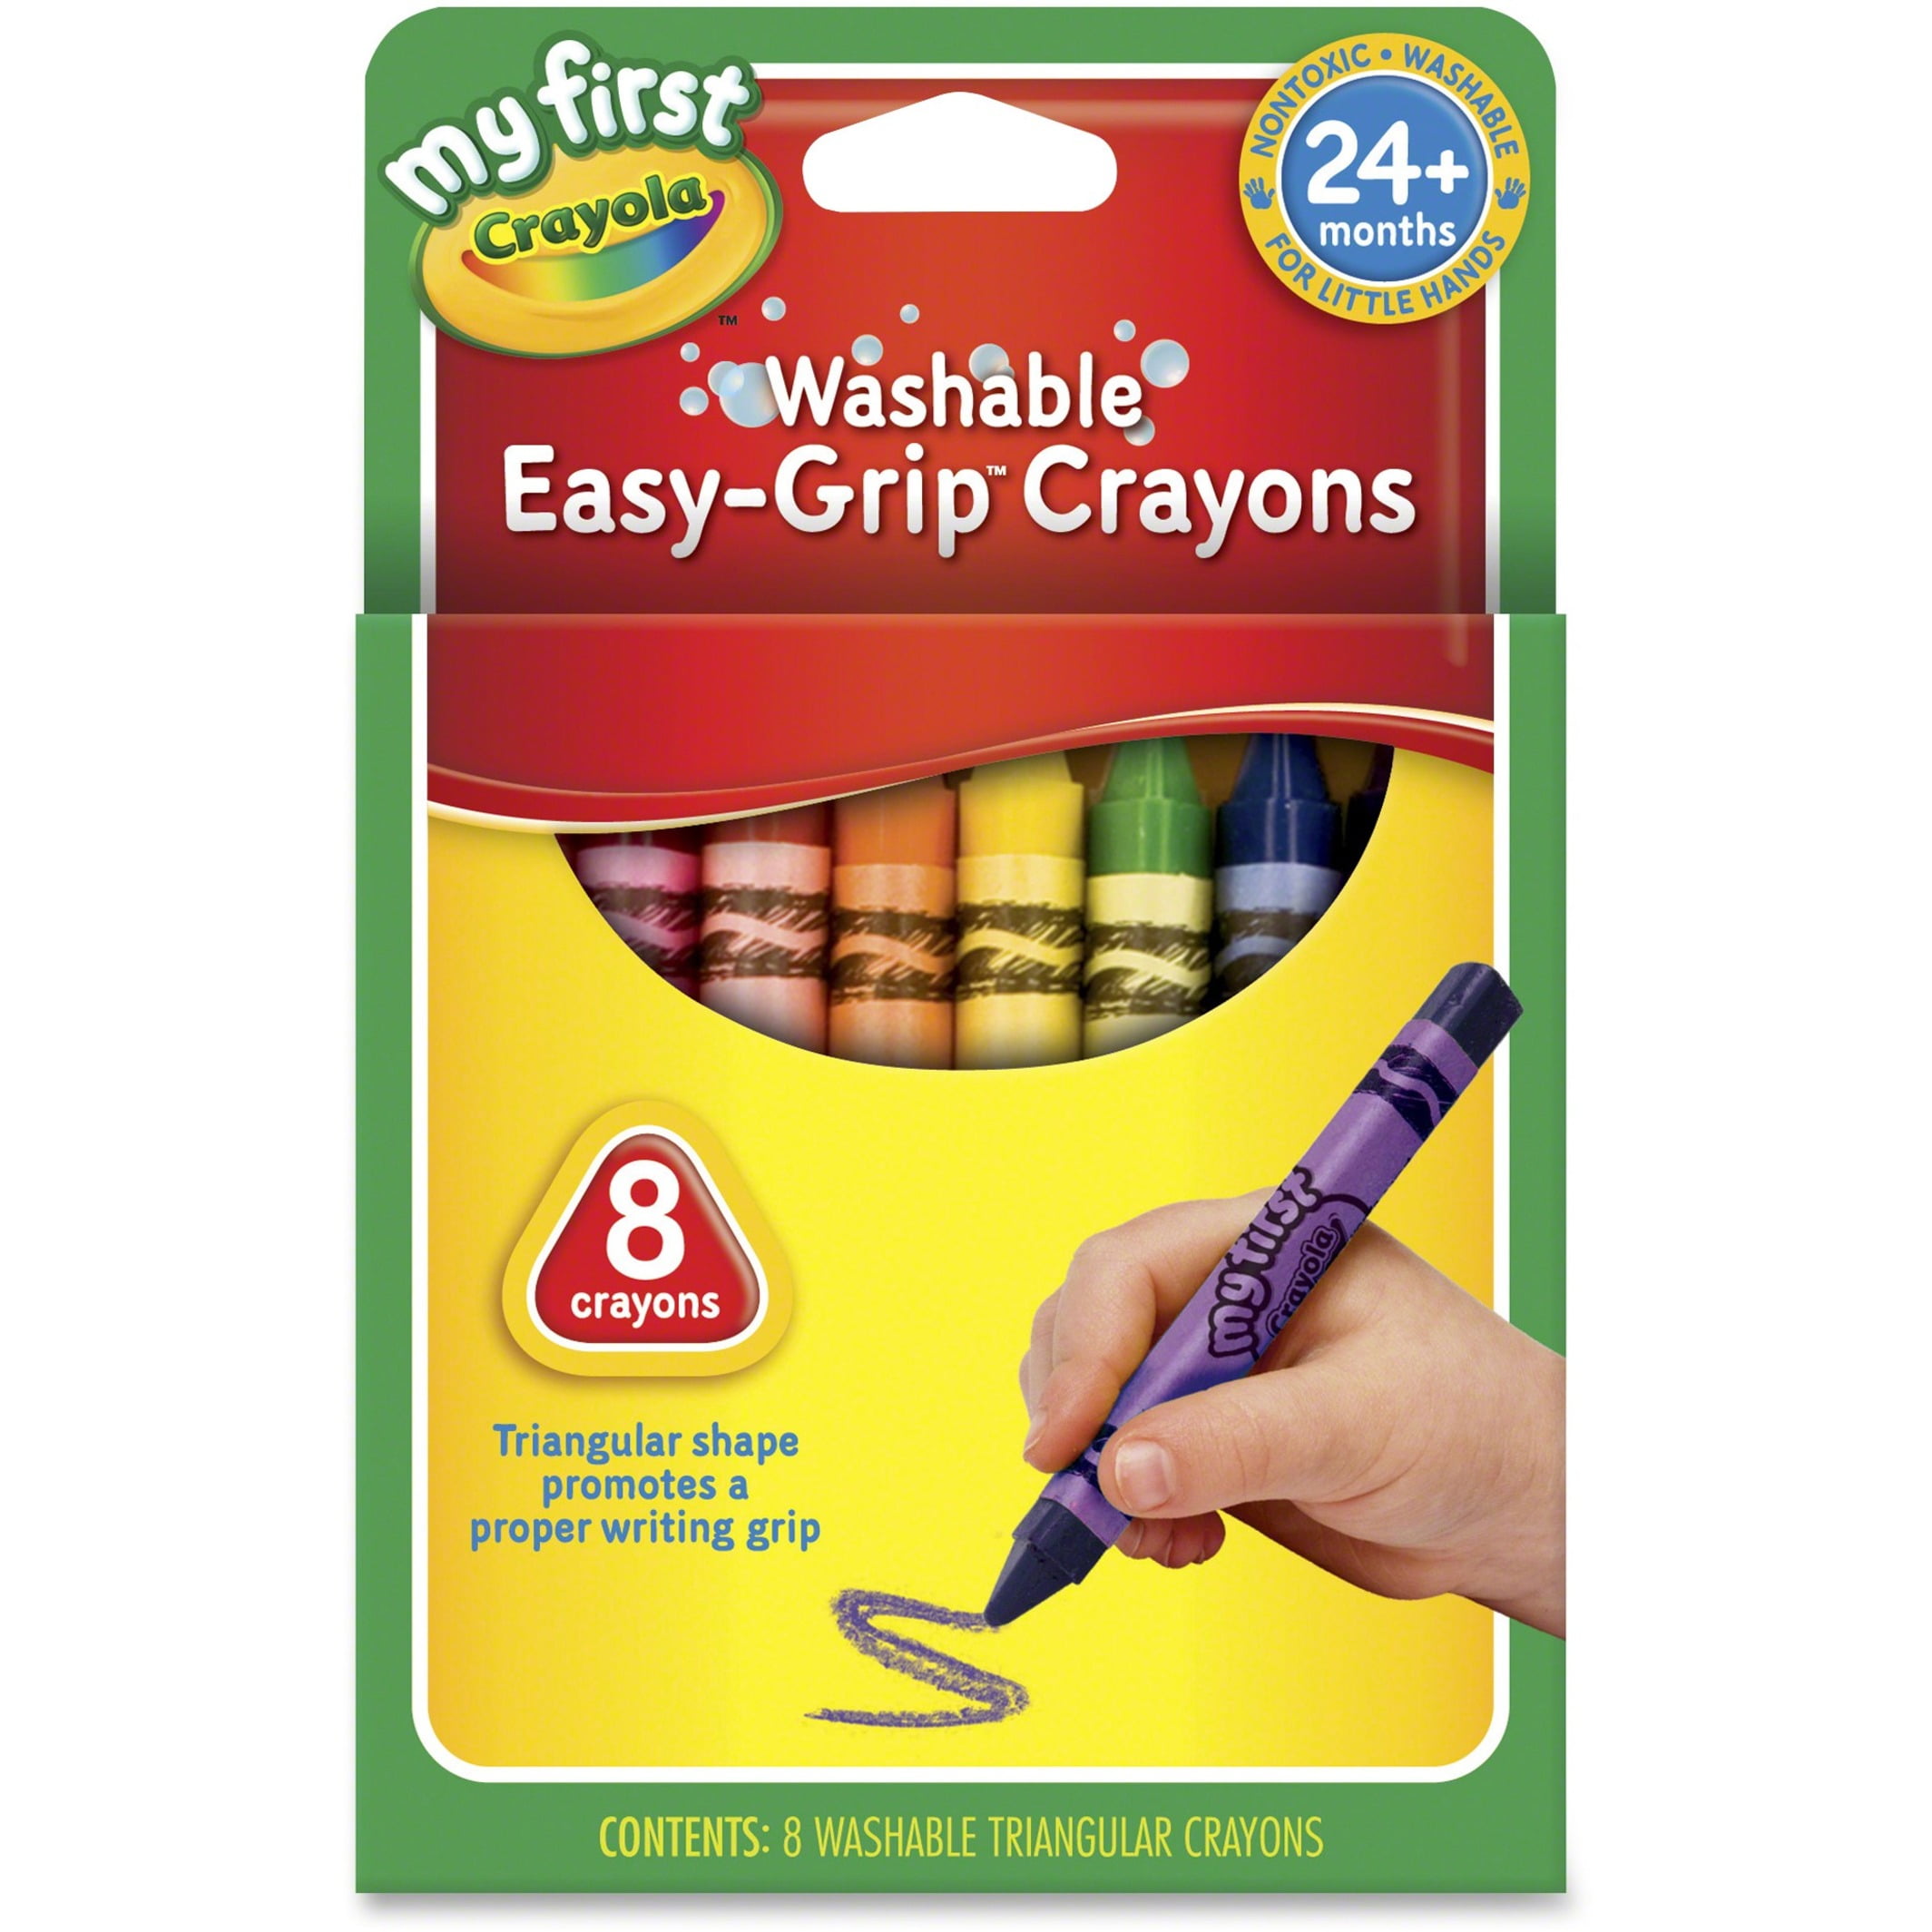  Crayola My First Egg Crayons, Easy-Grip : Toys & Games